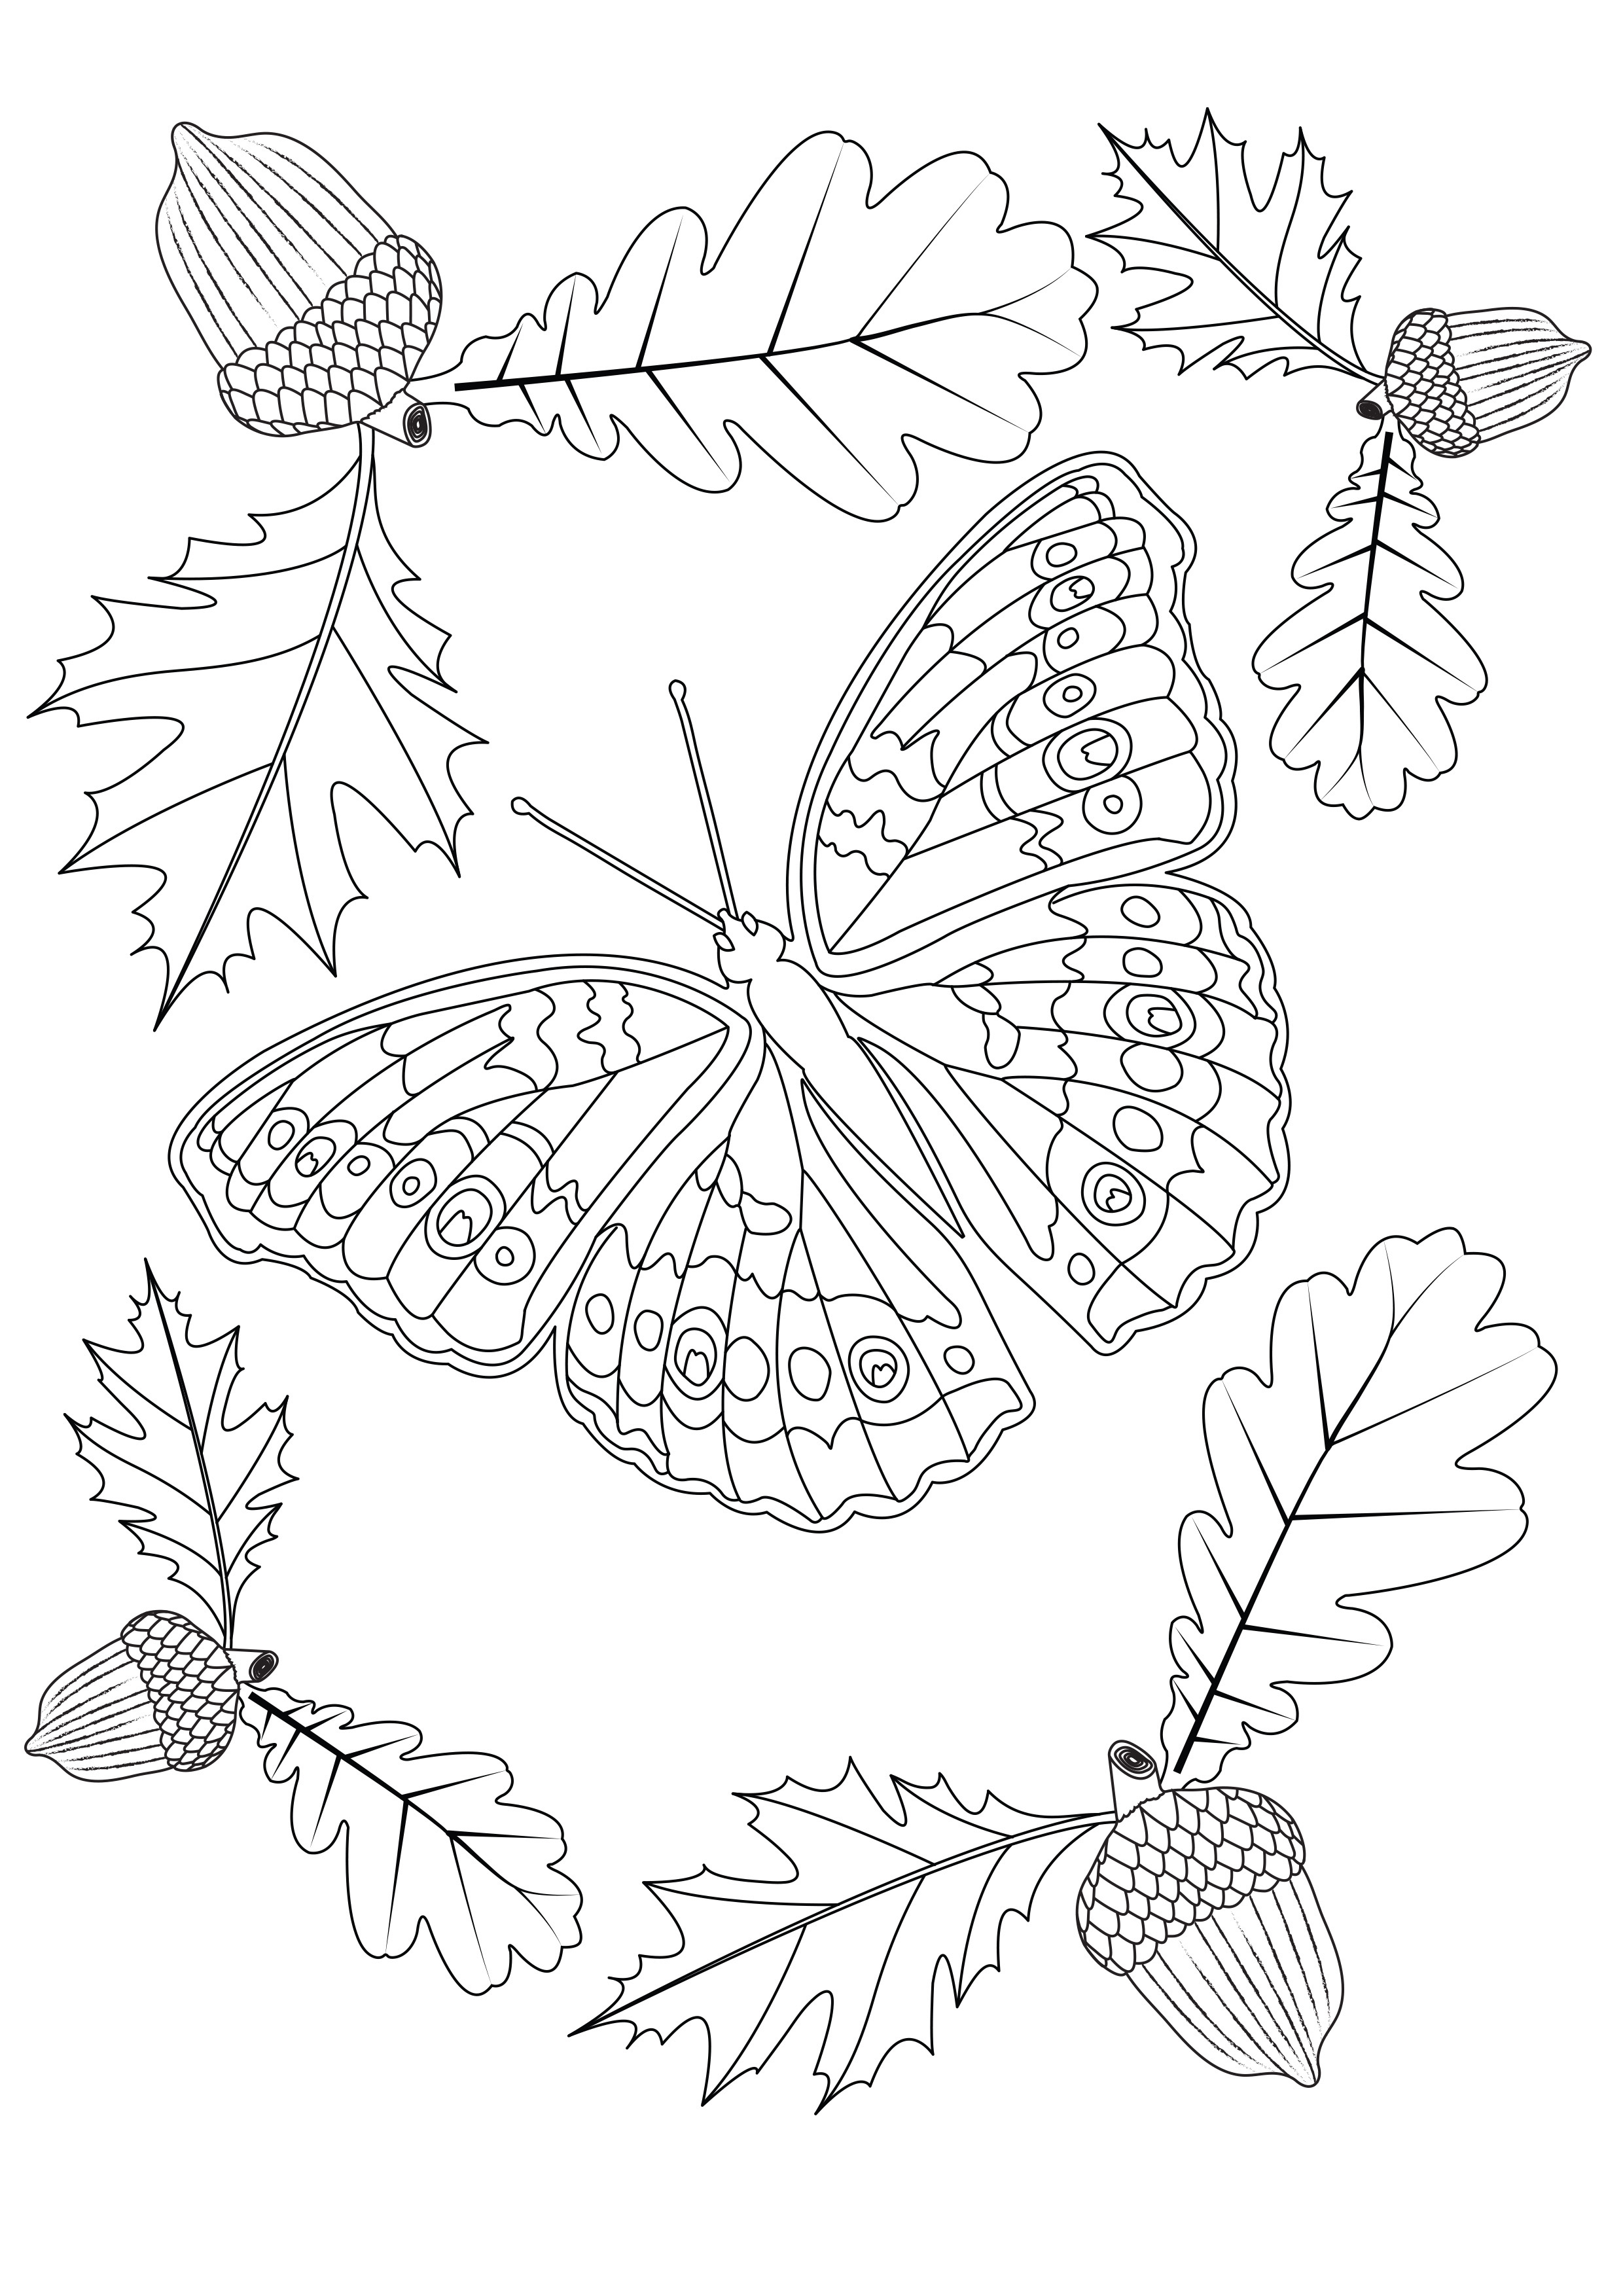 Autumn Butterfly, from the coloring book 'Butterfly garden', by Emma L Williams, Artist : Emma L Williams